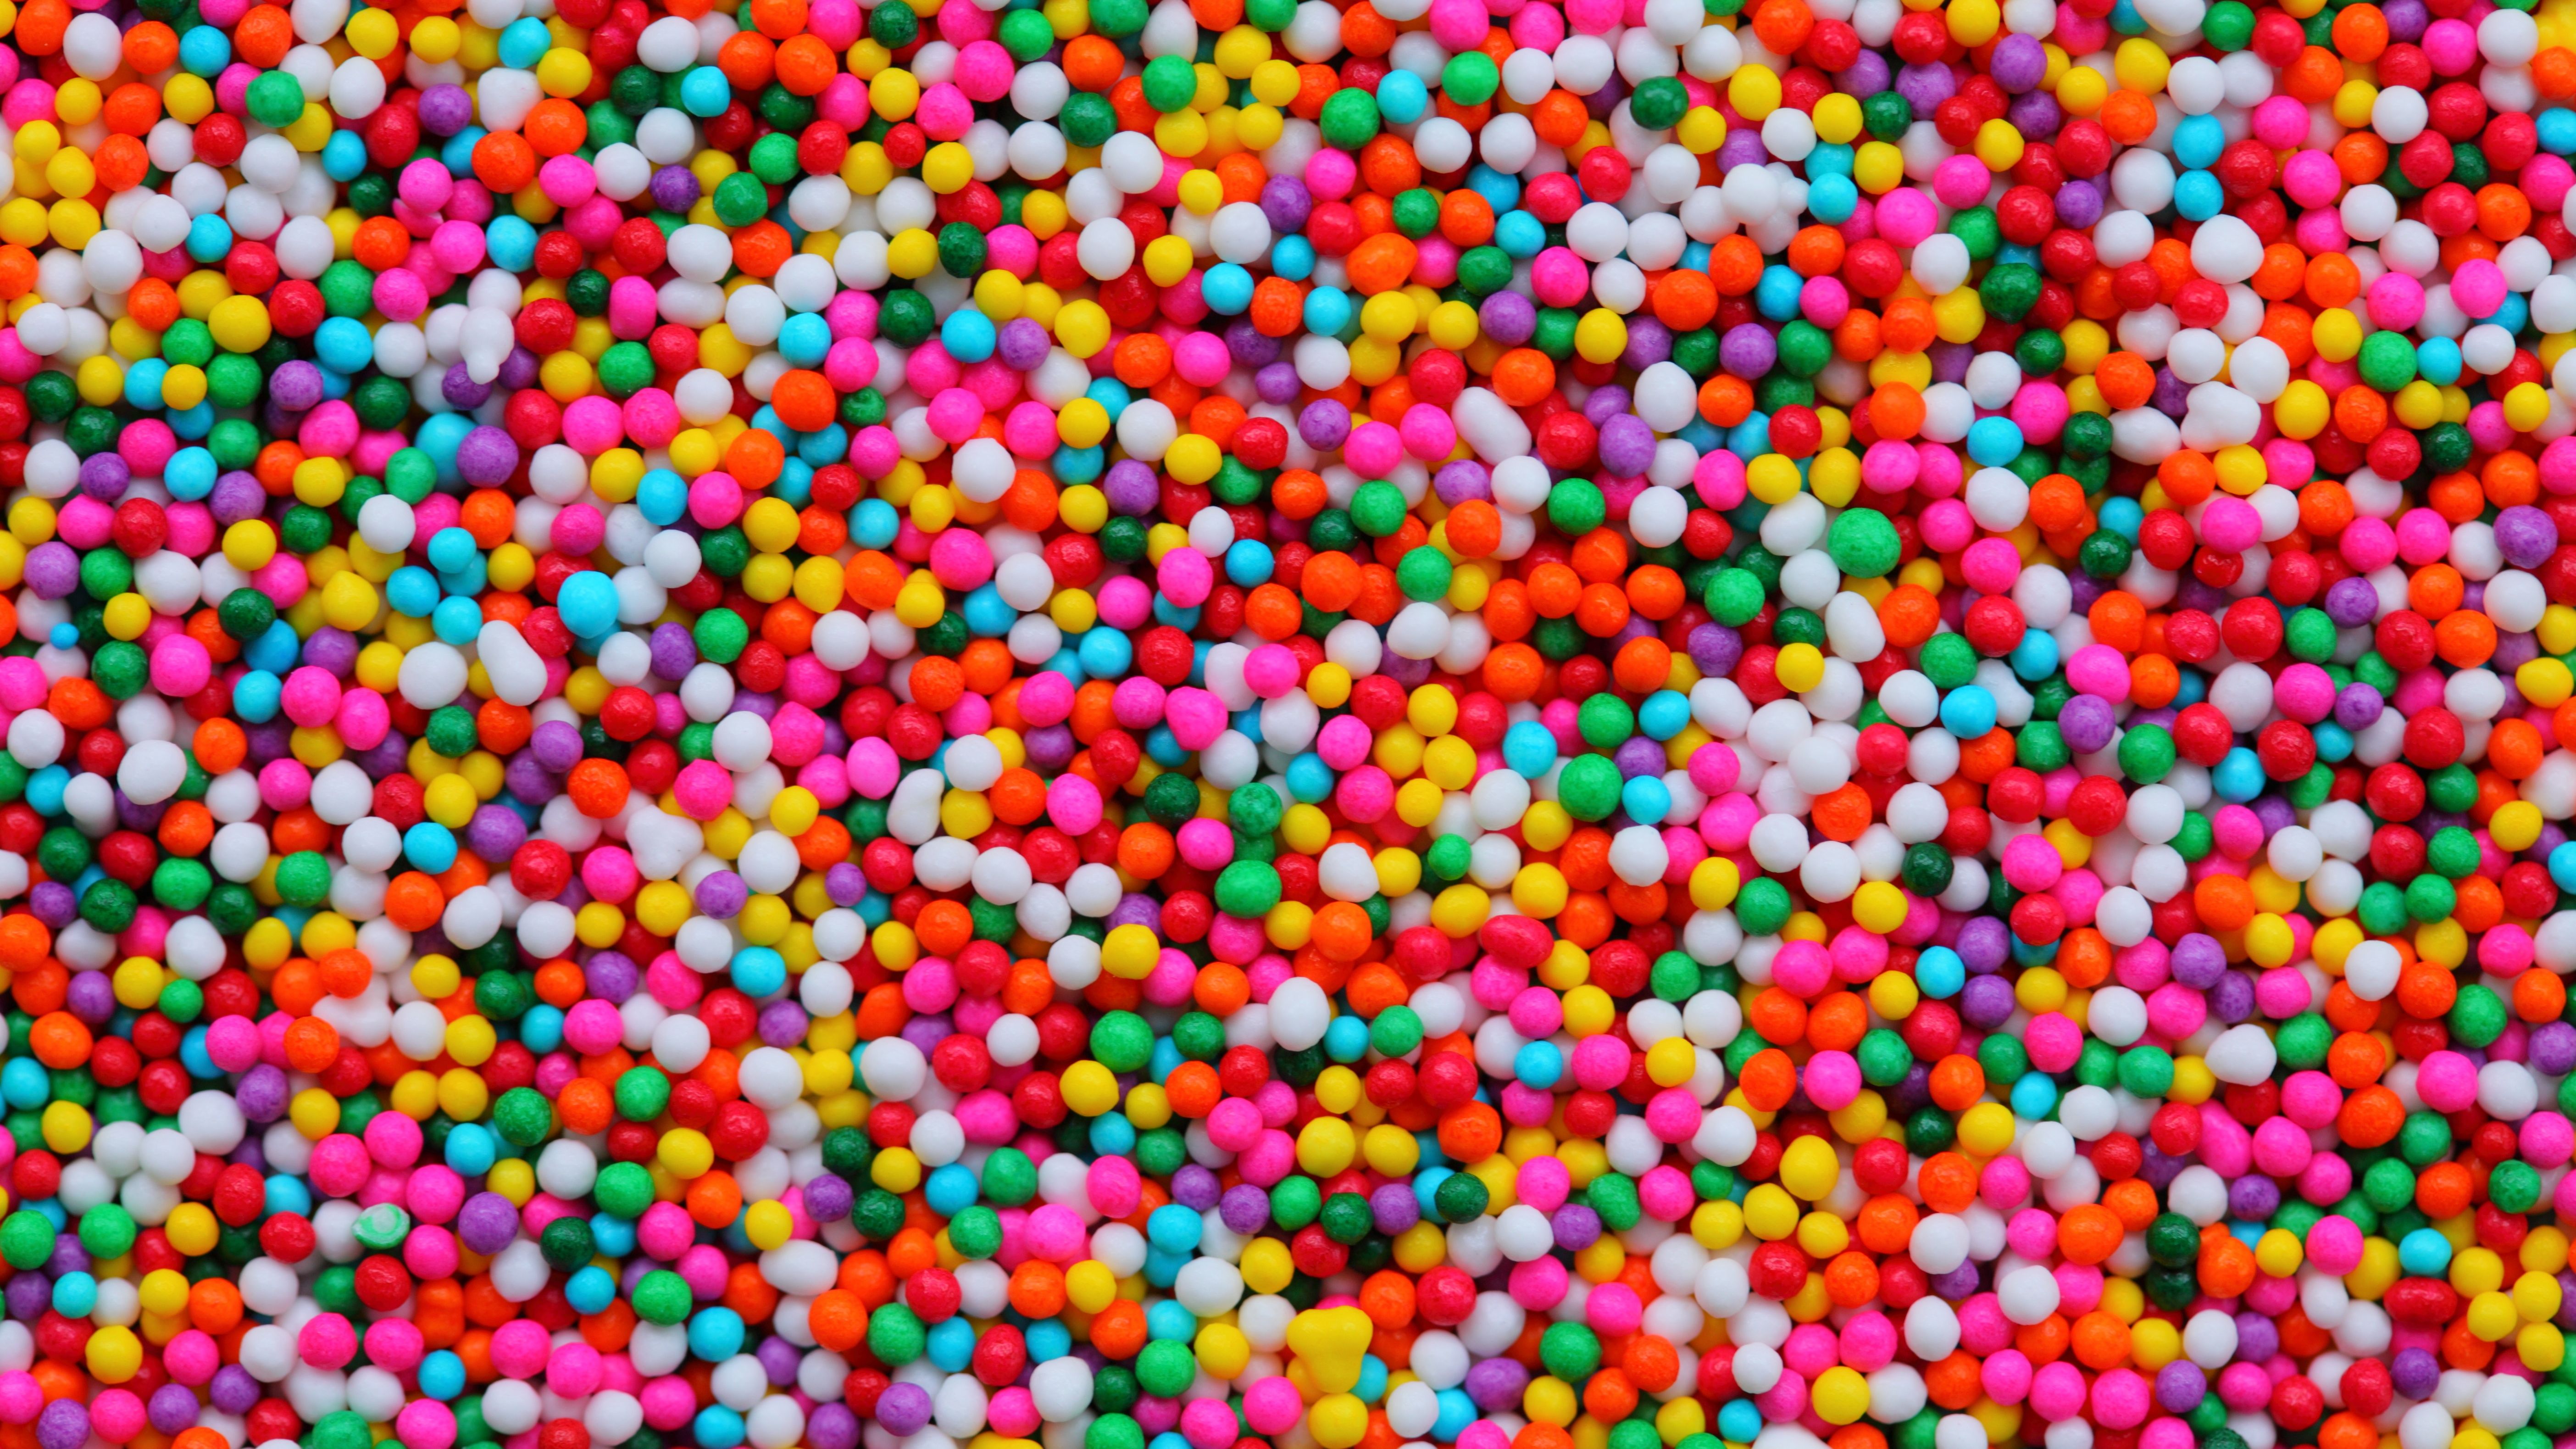 Candy Wallpapers High Quality Download Free HD Wallpapers Download Free Images Wallpaper [wallpaper981.blogspot.com]